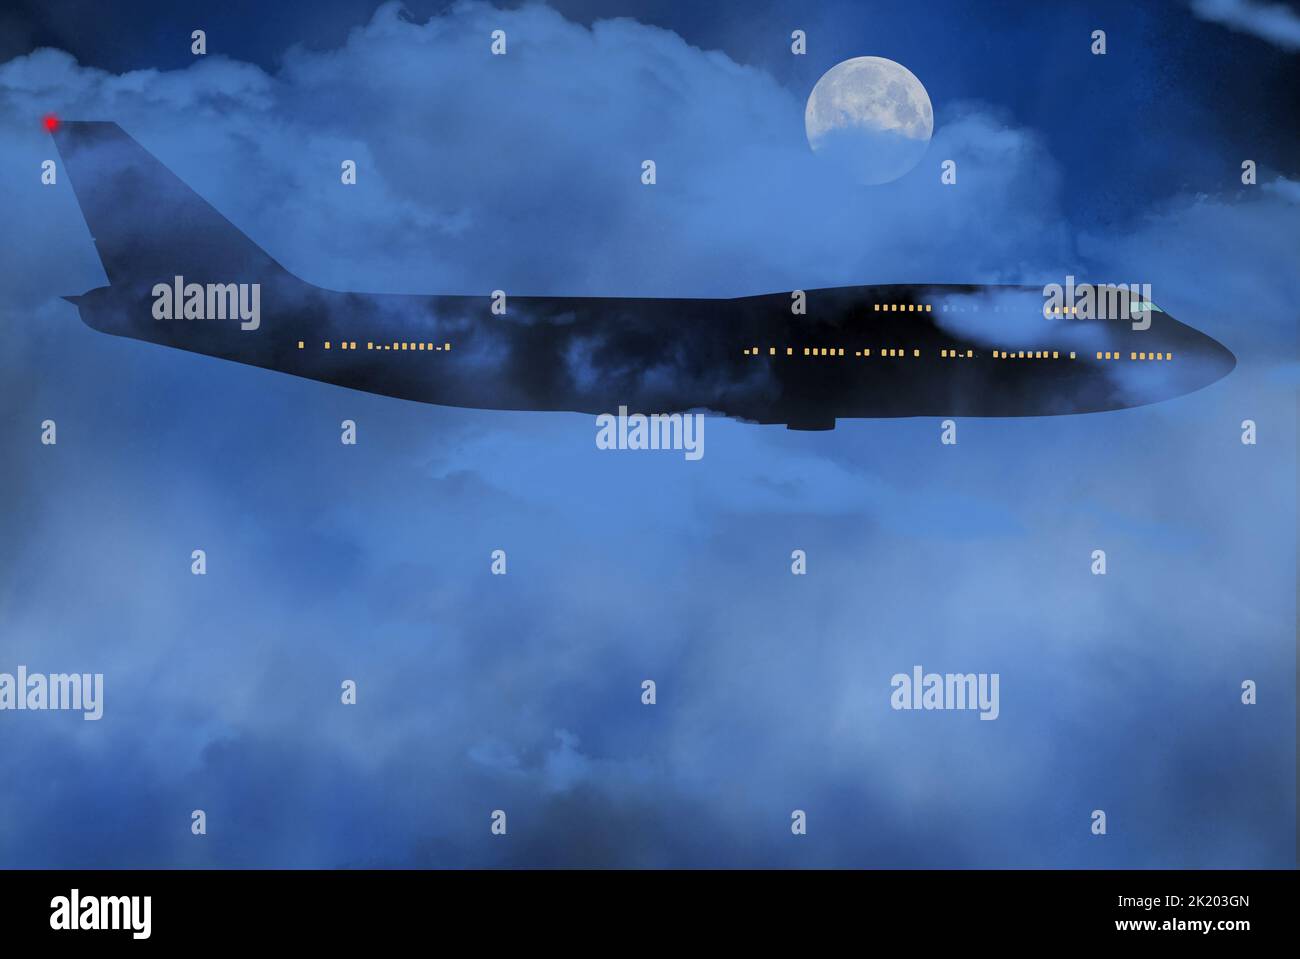 A passenger jet, an airliner, is seen flying though clouds and night with a full moon breaking through the clouds and fog in a 3-d illustration. Stock Photo